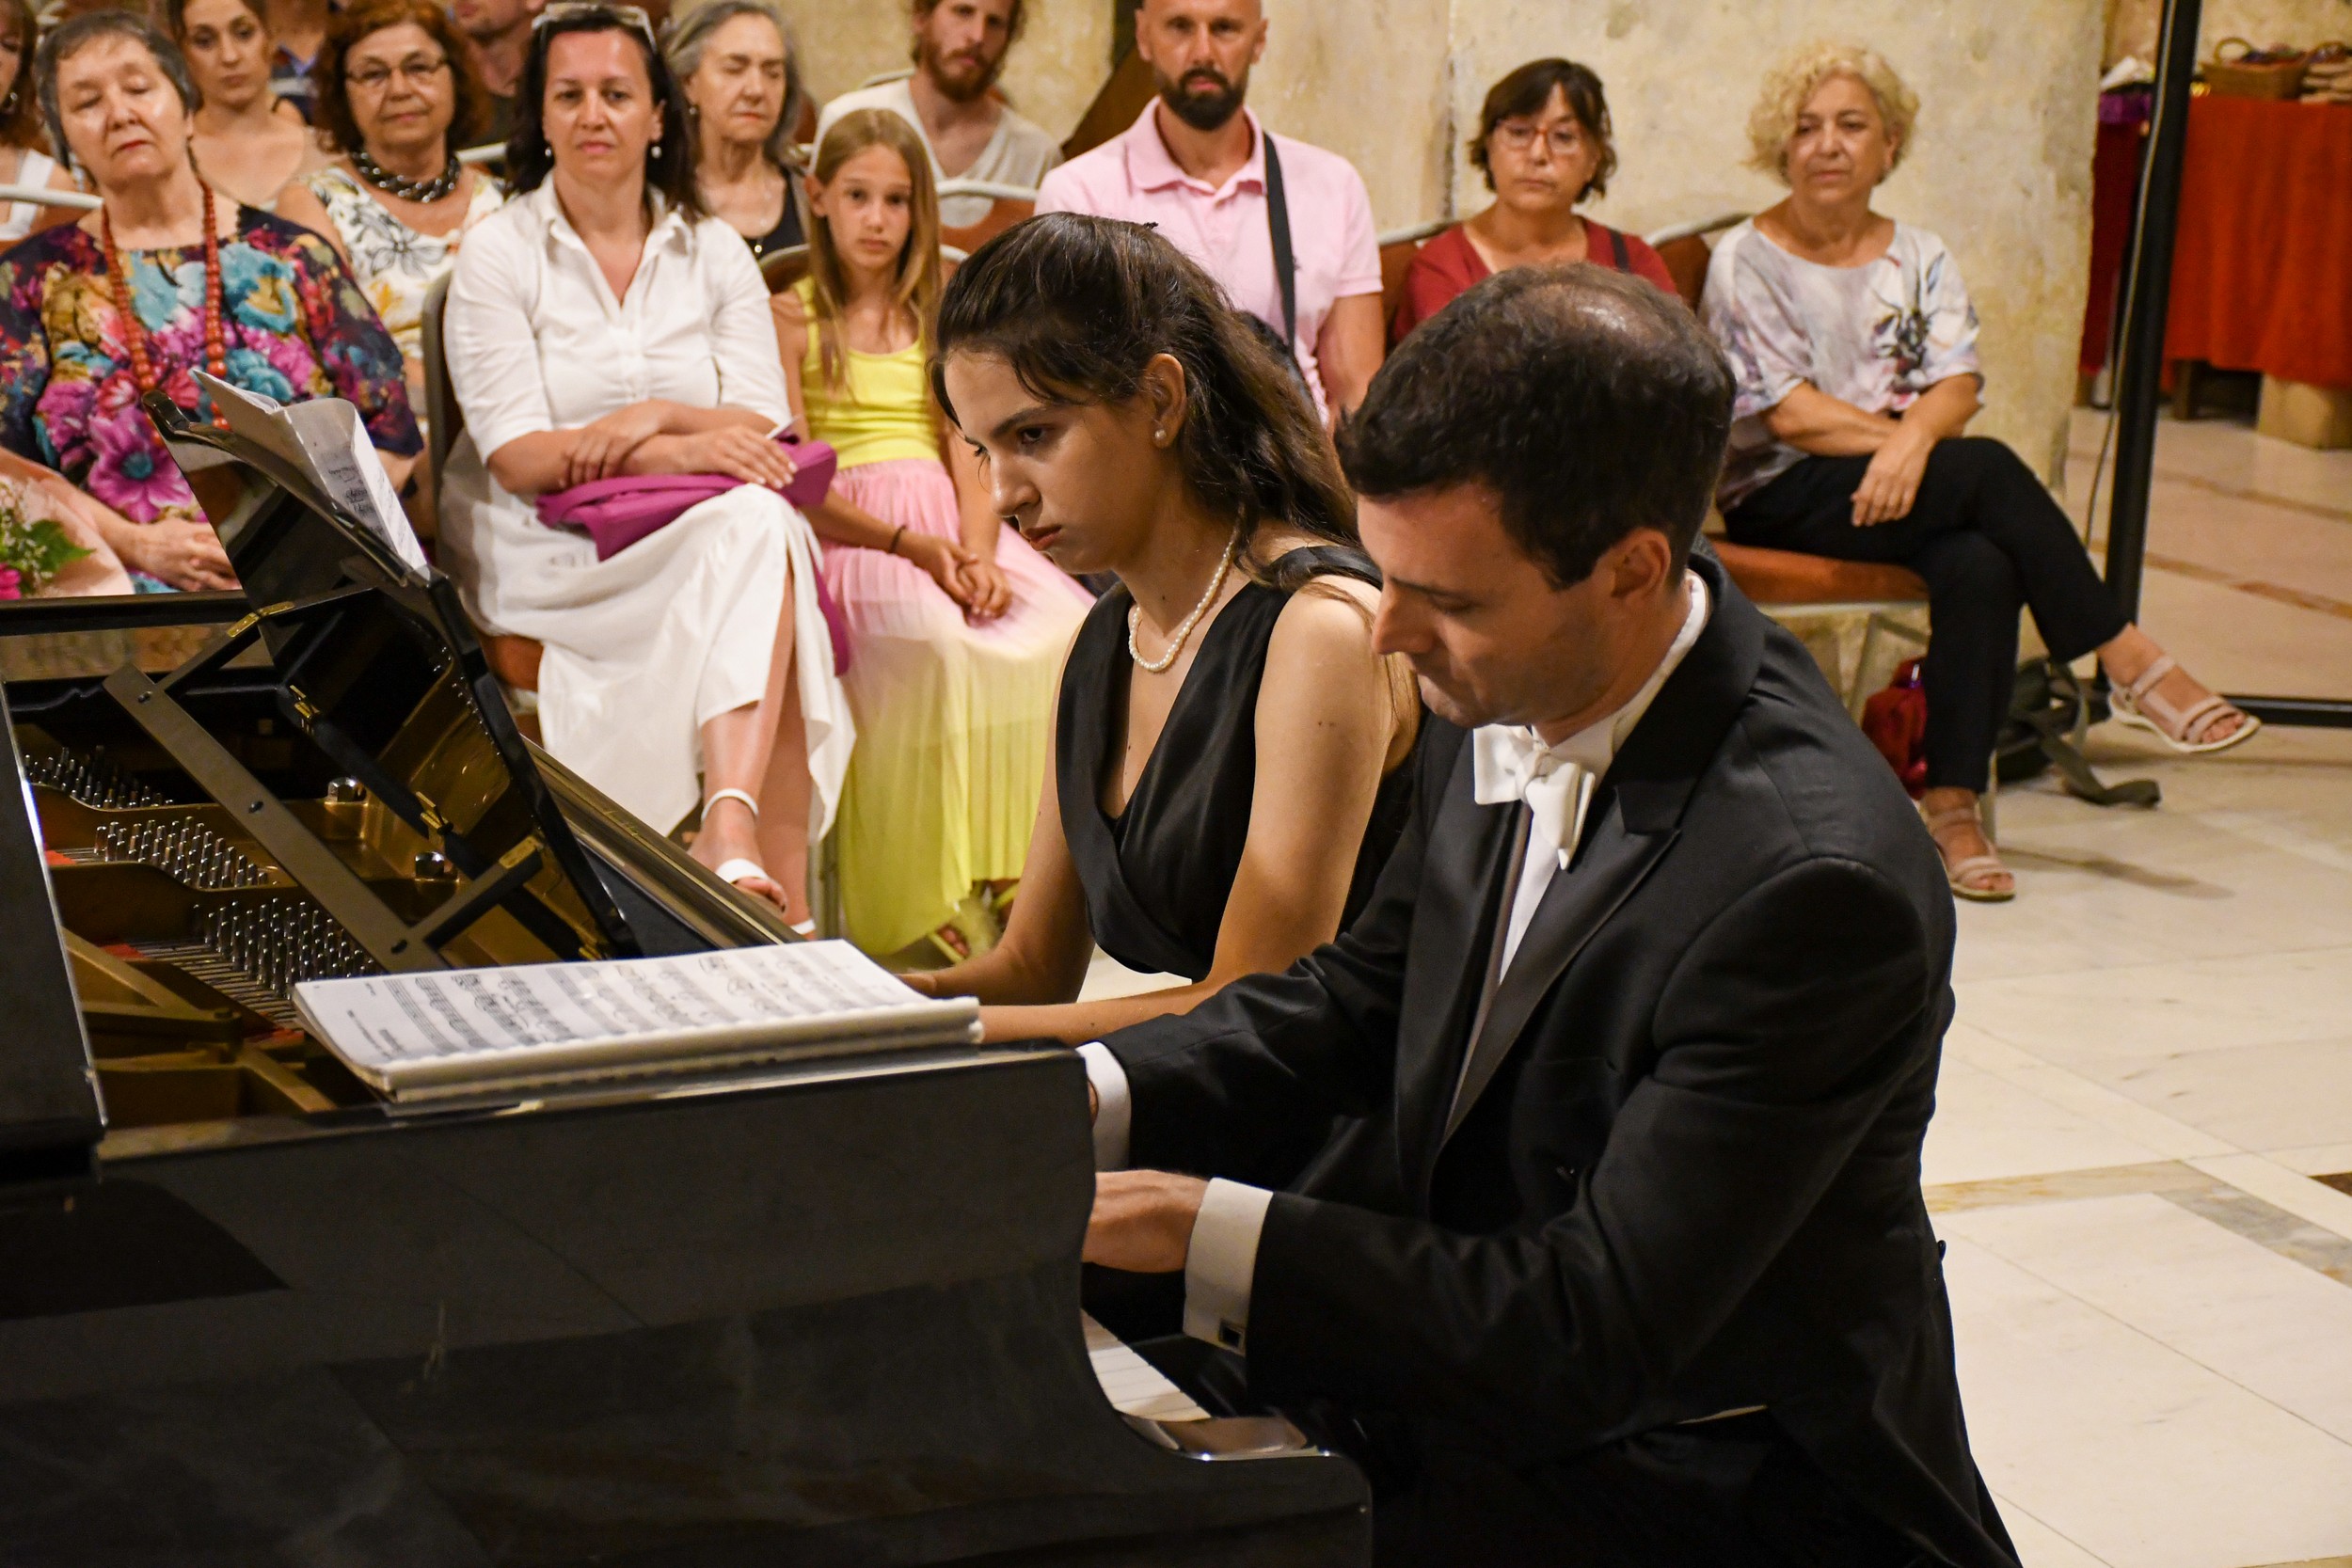 Review to the concert of Kristijan Karovski and Mimi Ducheva: Concert evening with compositions for four-hand piano